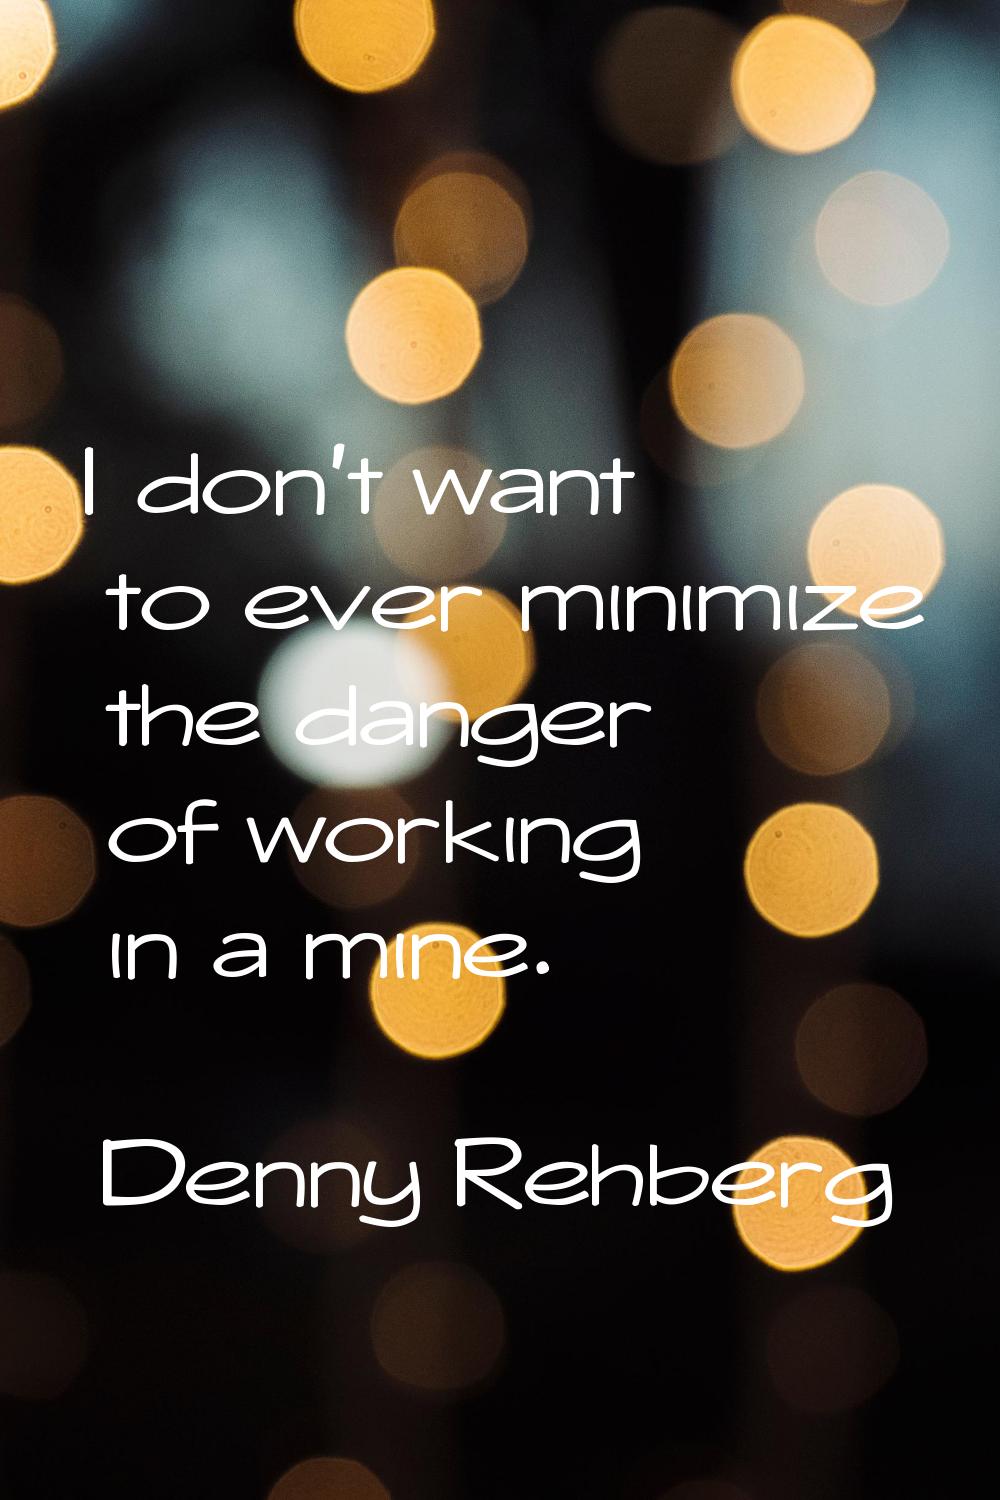 I don't want to ever minimize the danger of working in a mine.